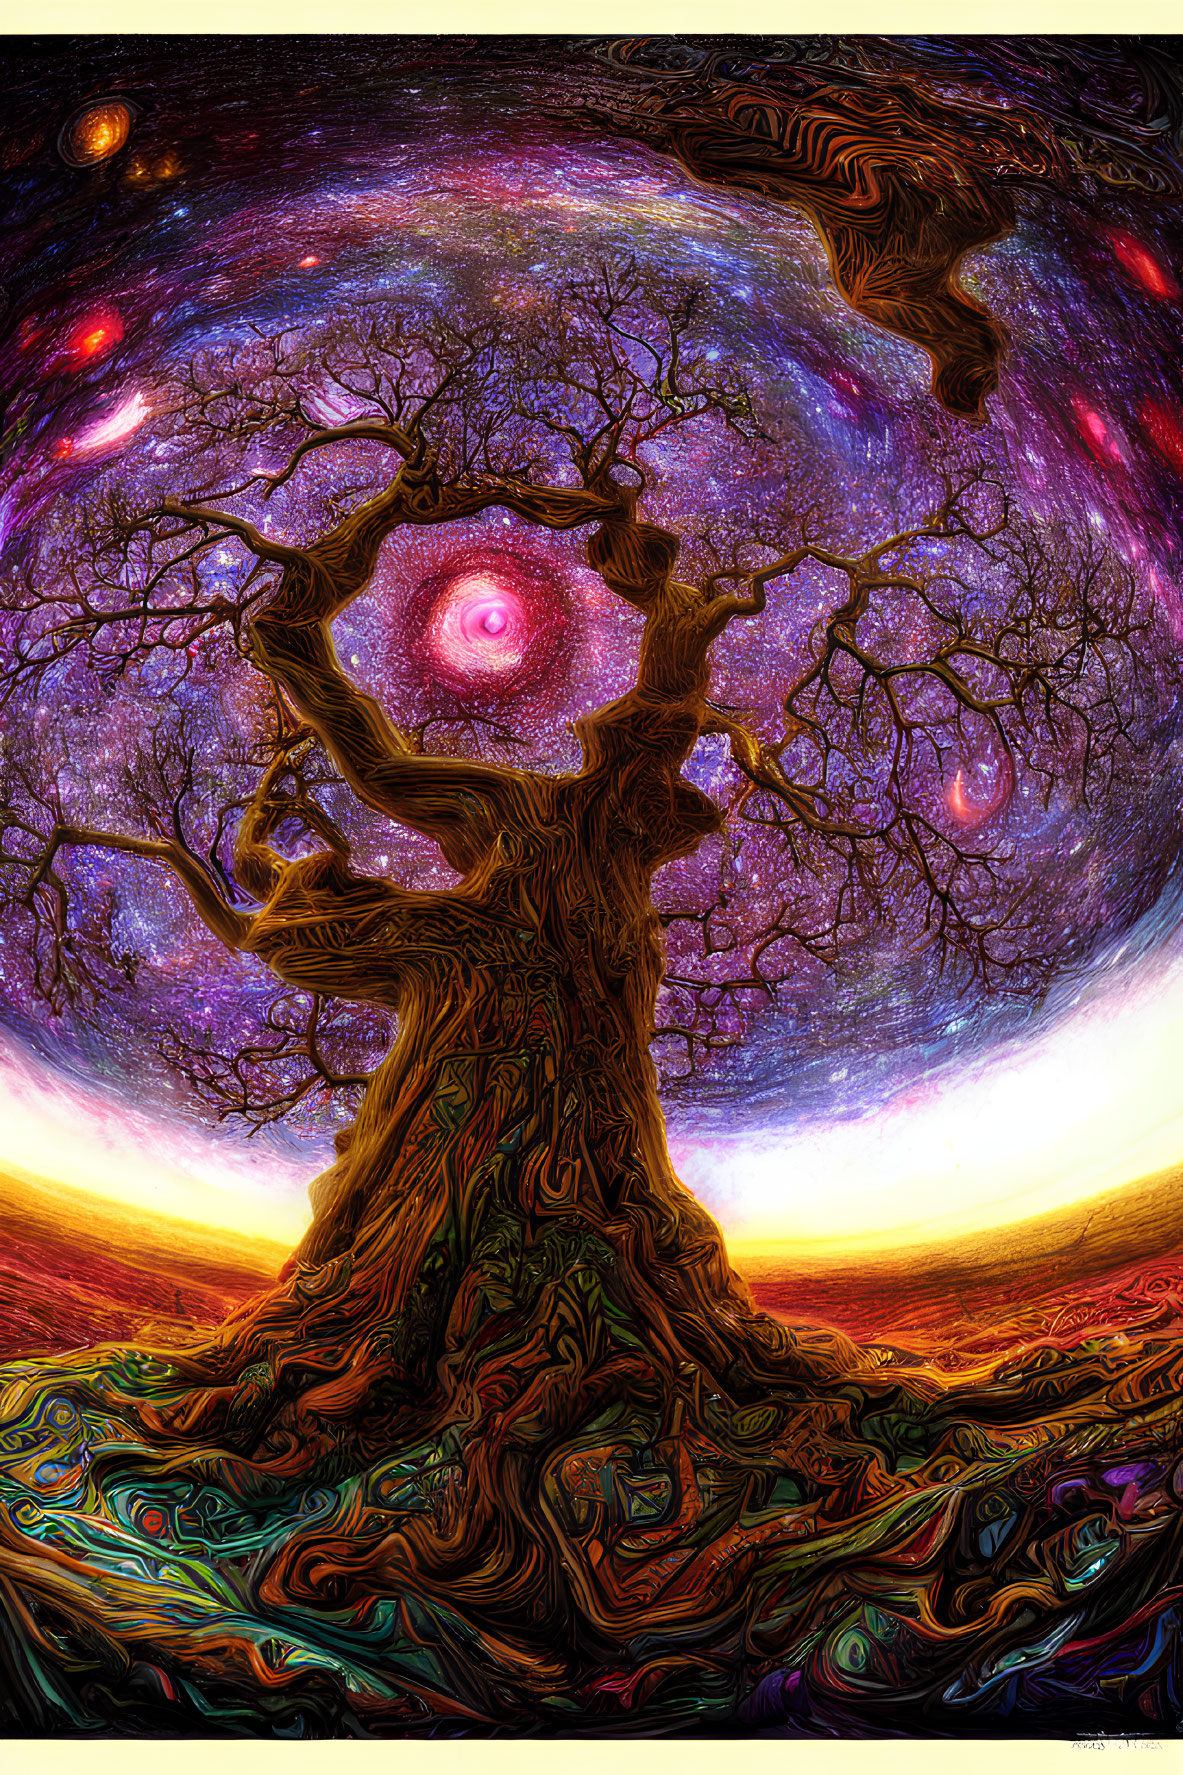 Colorful surreal cosmic tree under starry sky in vibrant artwork